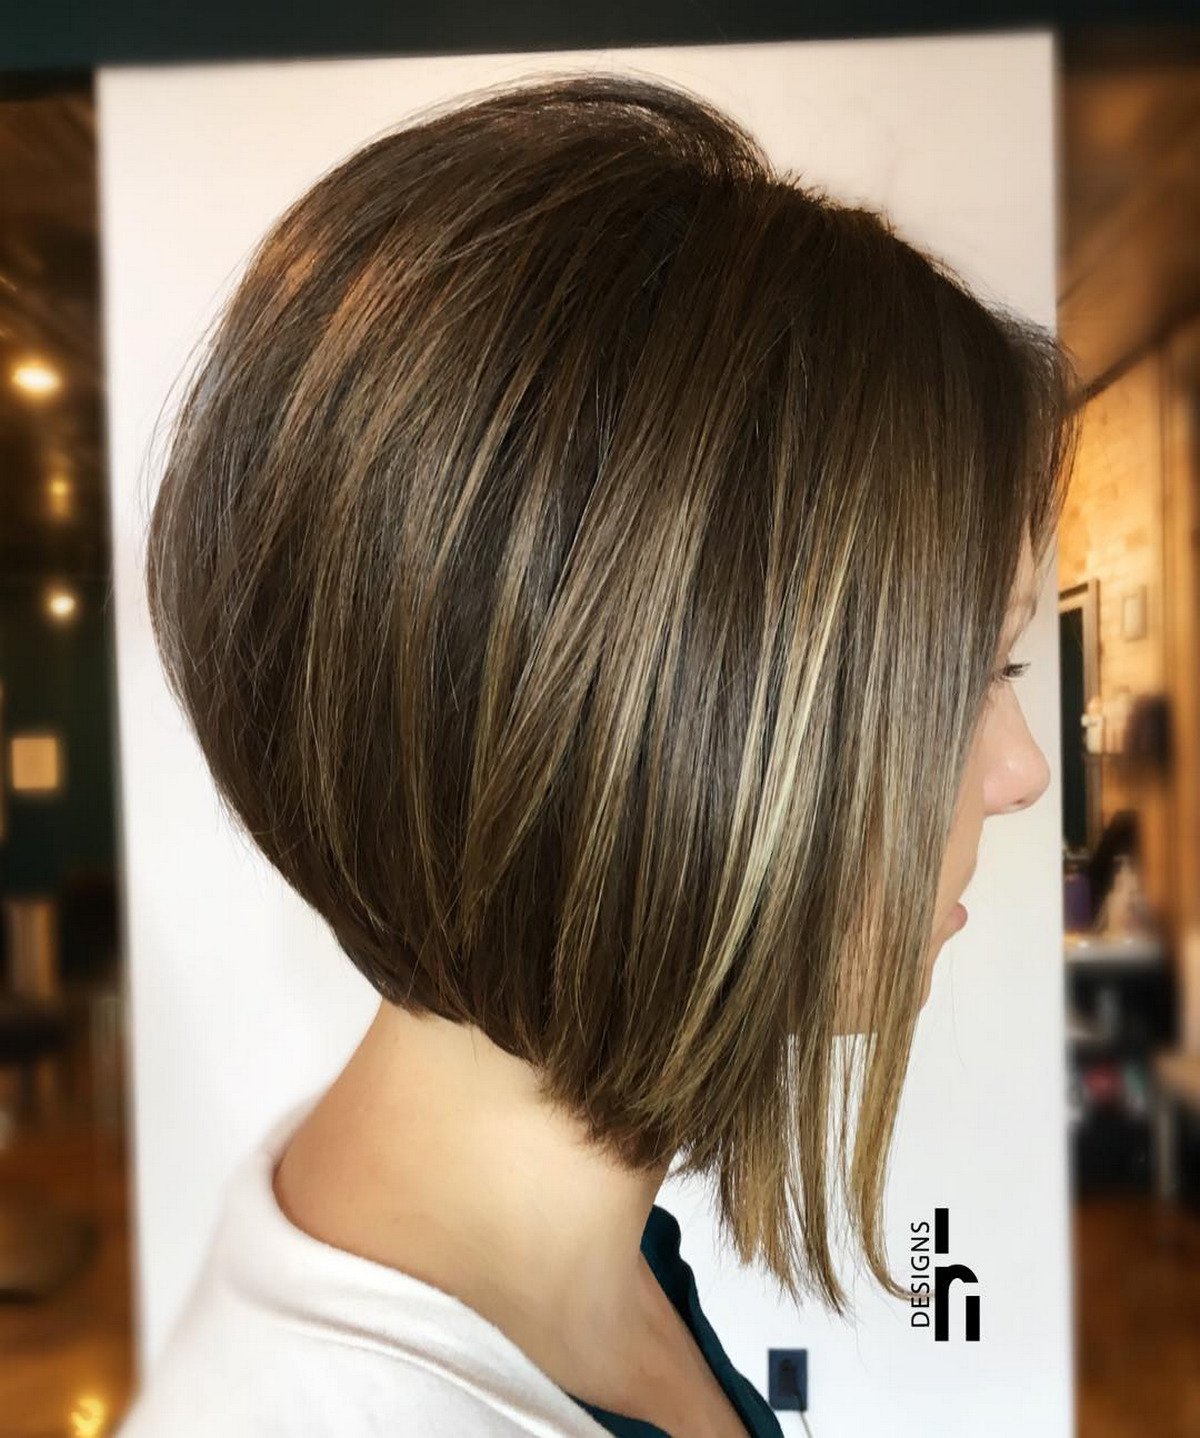 Inverted Bob with Rounded Back